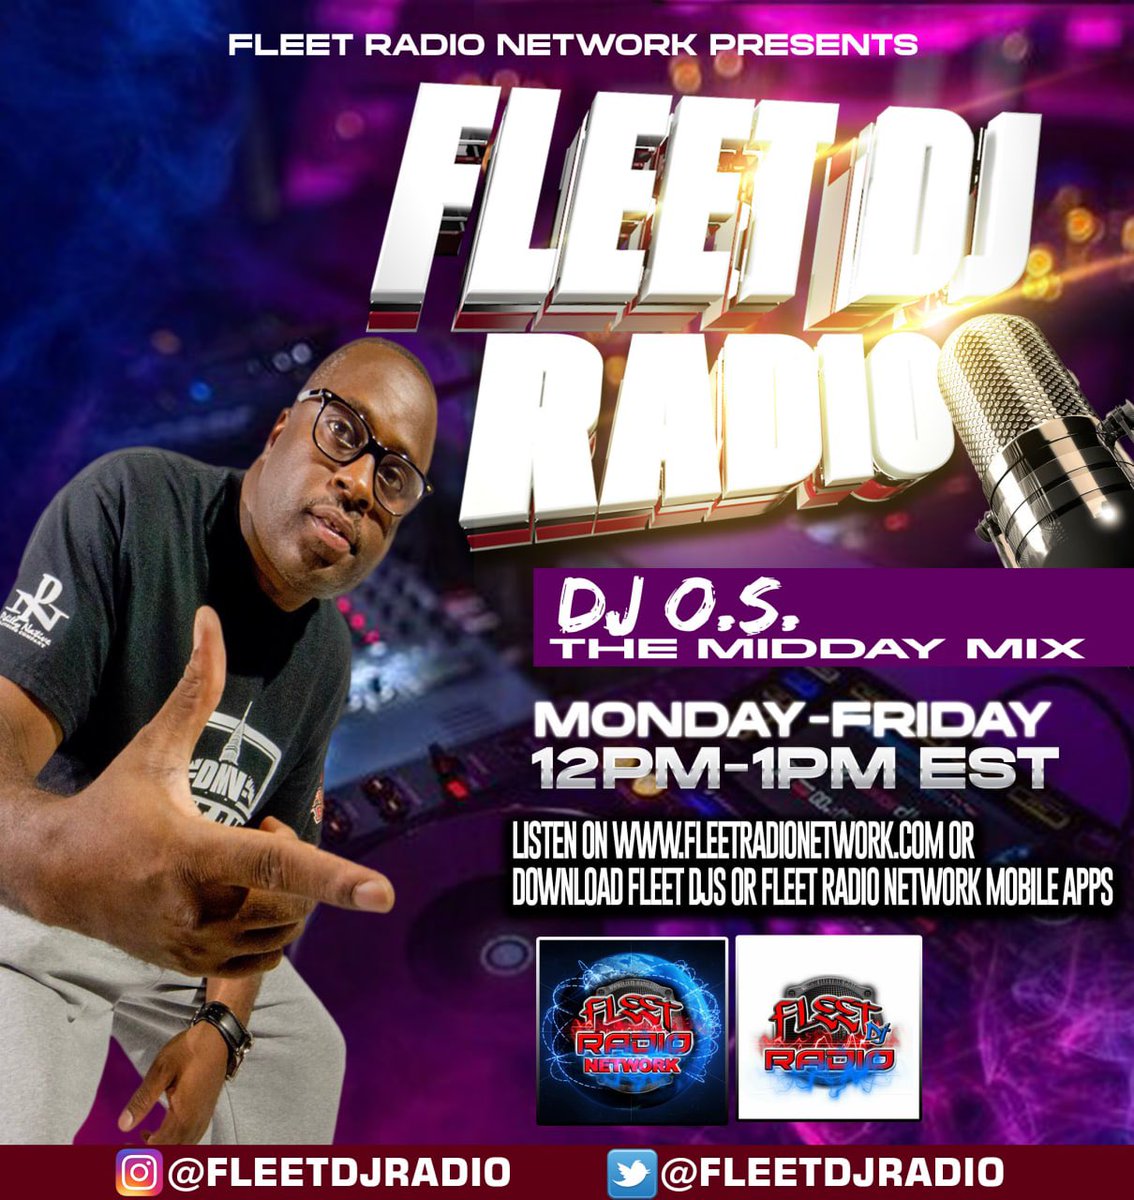 Check out the new midday mix in @fleetdjradio 12p-1p weekdays @DJOS100